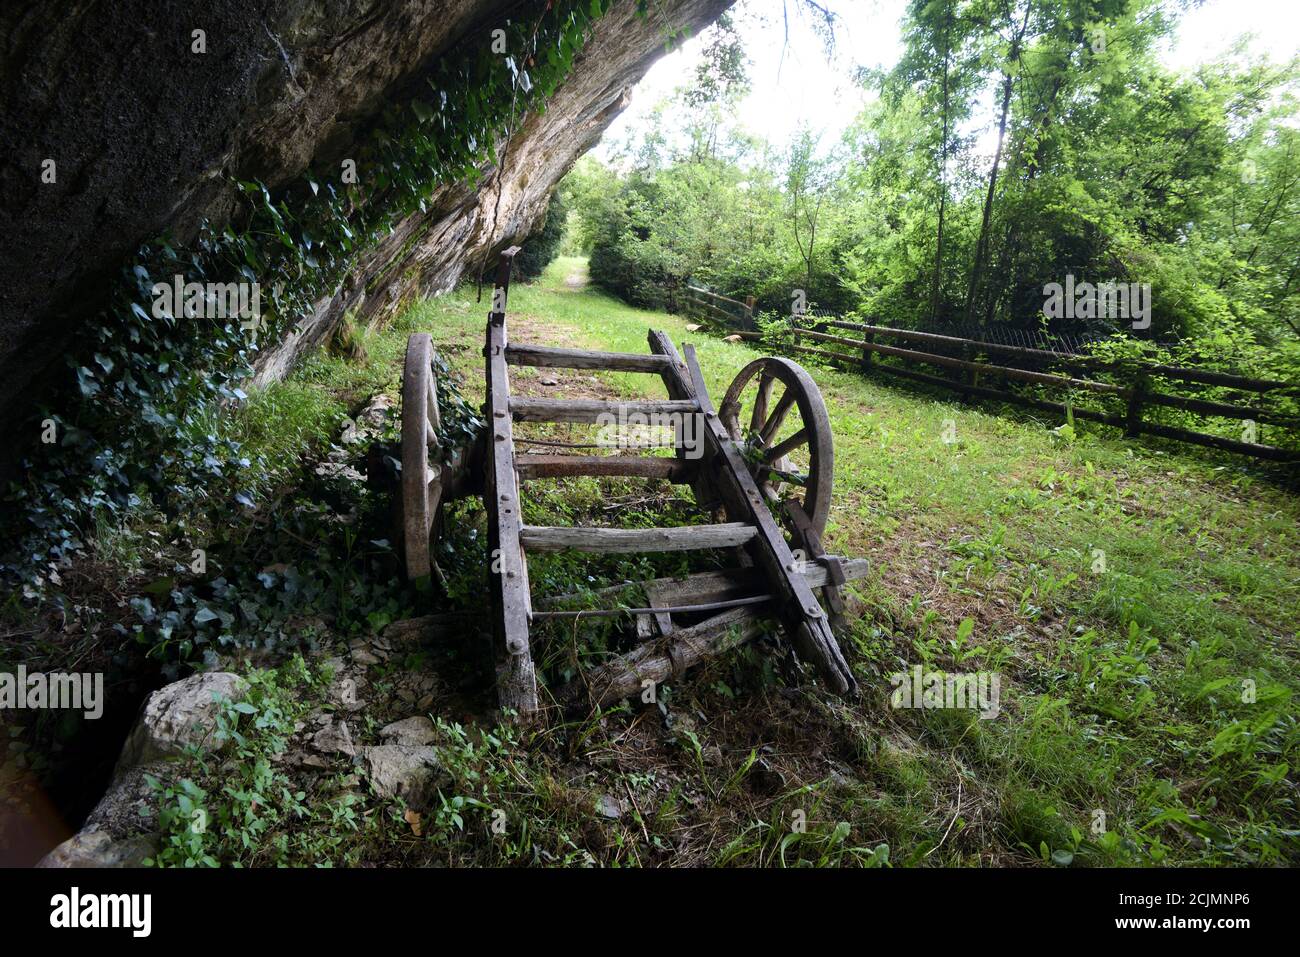 Abandoned Old Wooden Cart or Hay Cart under Natural Stone Shelter Blieux Alpes-de-Haute-Provence Provence France Stock Photo